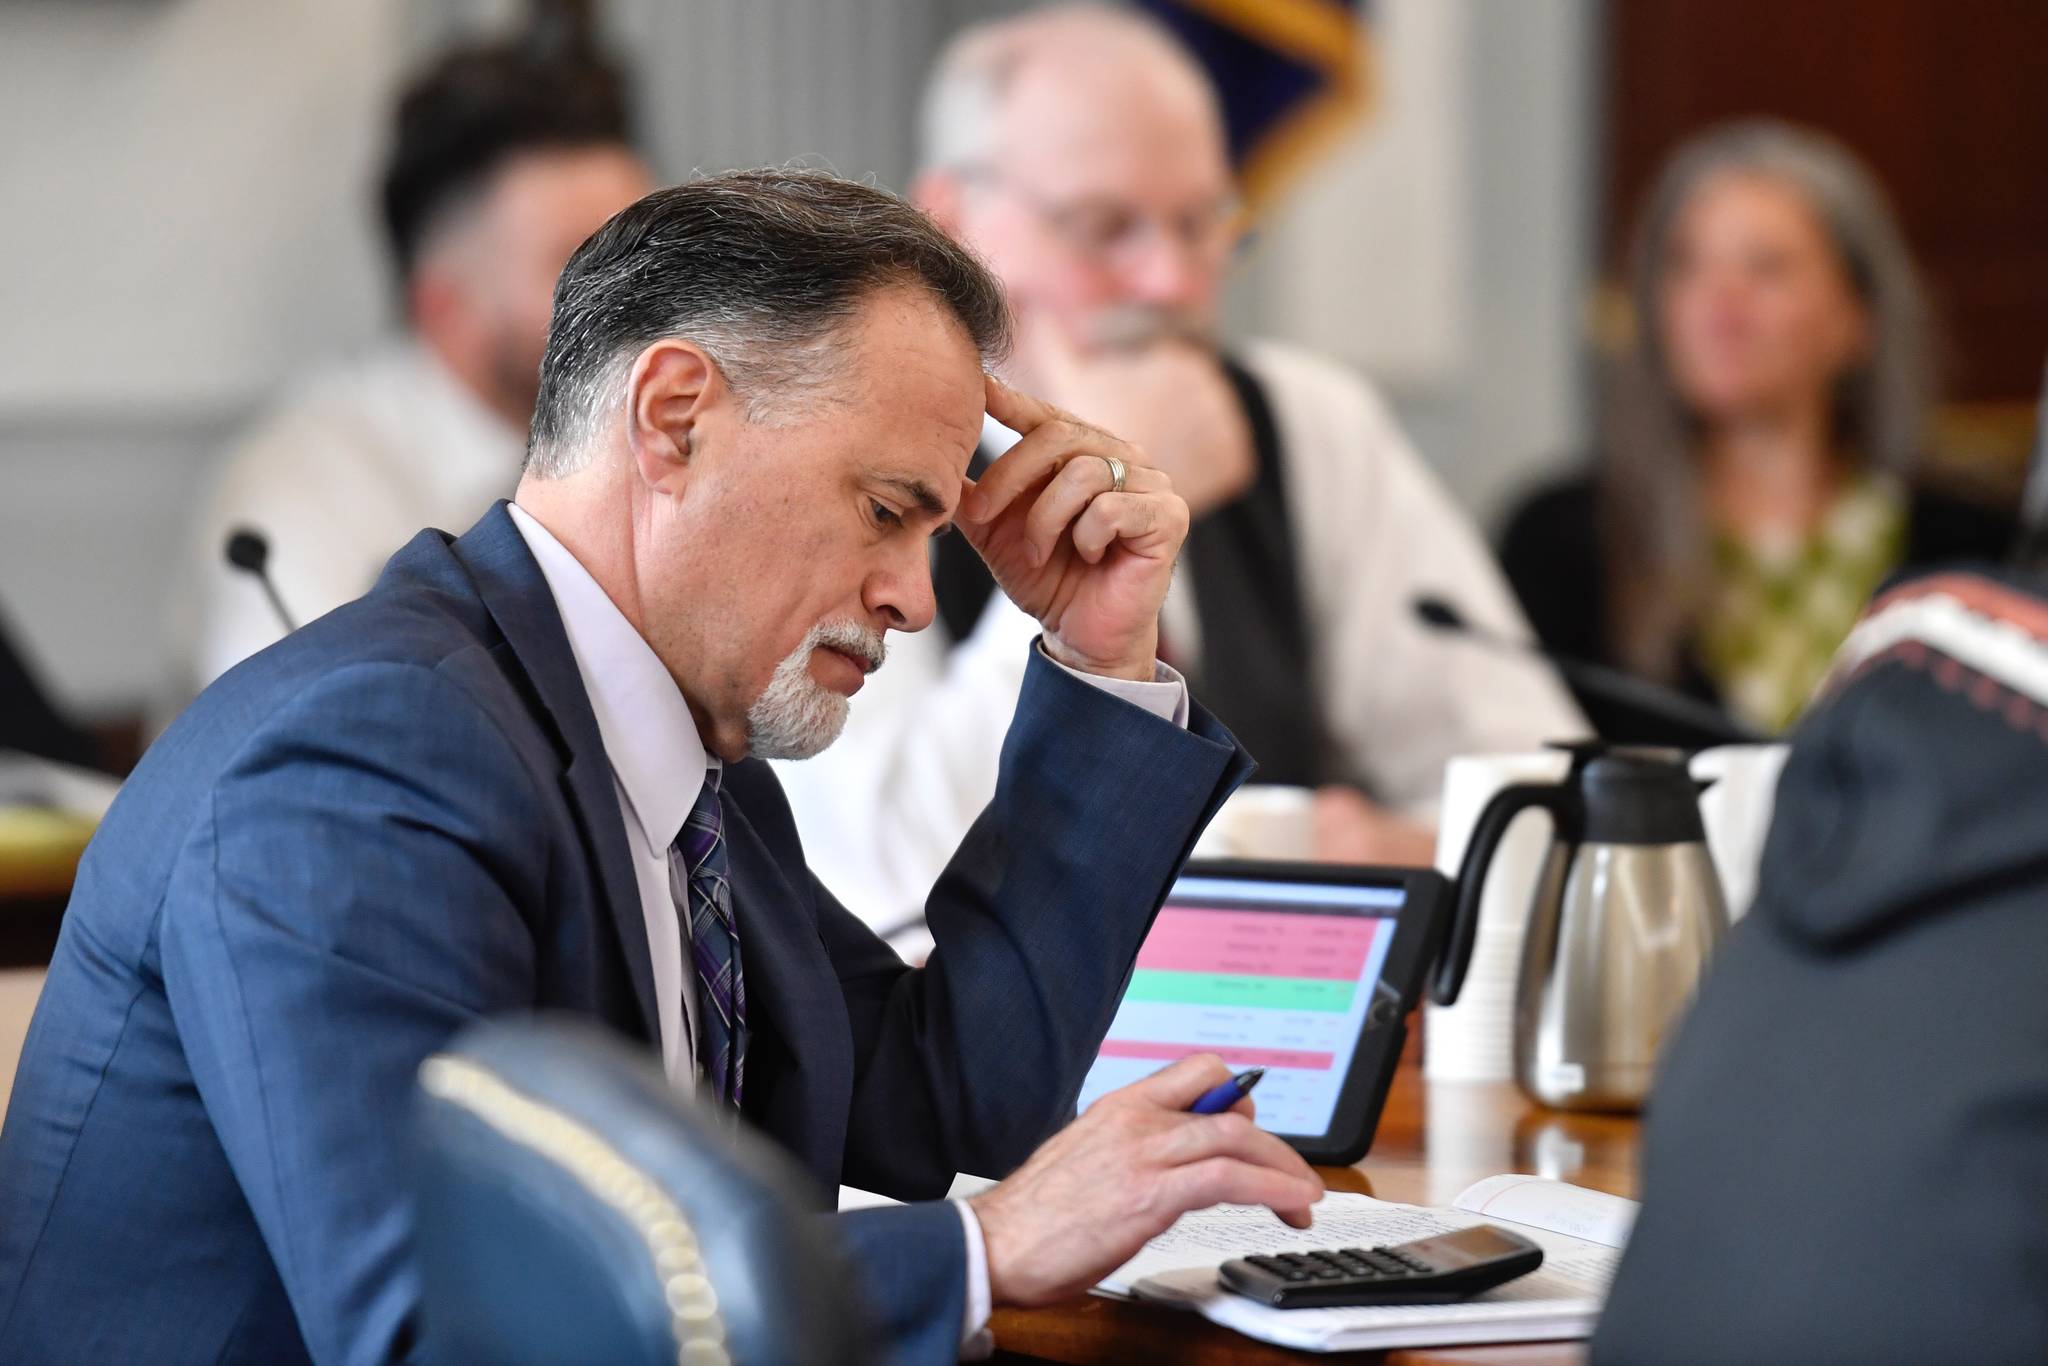 David Teal, Director of the Legislative Finance Division, gives his analysis of Gov. Mike Dunleavy’s state budget to the Senate Finance Committee at the Capitol on Tuesday, Feb. 26, 2019. (Michael Penn | Juneau Empire File)                                Sen. Peter Micciche, R-Soldotna, works a calculator as he and Sen. Bert Stedman, R-Sitka, listen to public testimony on the state budget in the Senate Finance Committee hearing on Friday, April 12, 2019. (Michael Penn | Juneau Empire)